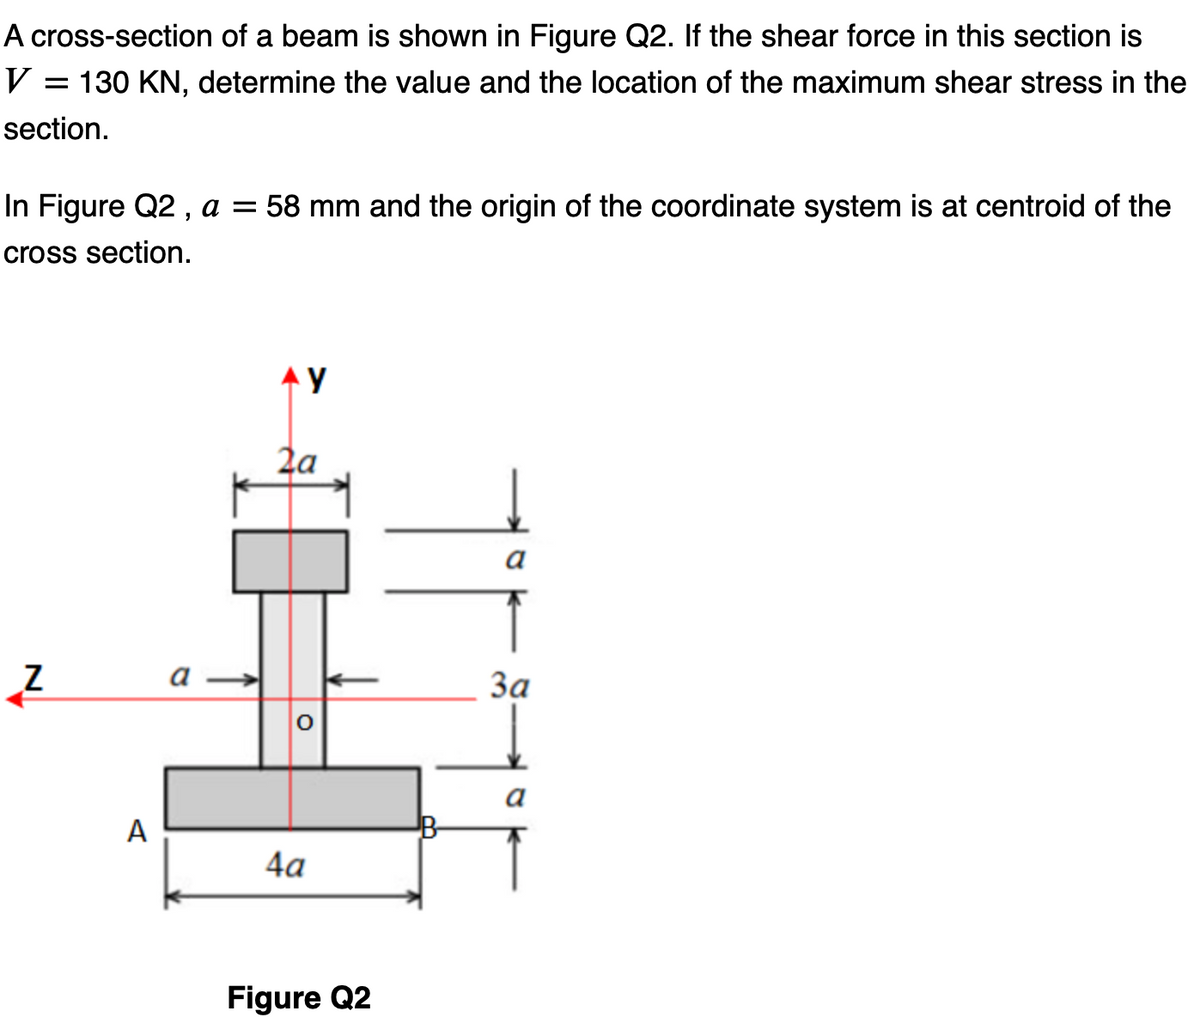 A cross-section of a beam is shown in Figure Q2. If the shear force in this section is
V = 130 KN, determine the value and the location of the maximum shear stress in the
section.
In Figure Q2, a = 58 mm and the origin of the coordinate system is at centroid of the
cross section.
Z
A
a
AY
2a
4a
Figure Q2
7°1
3a
a